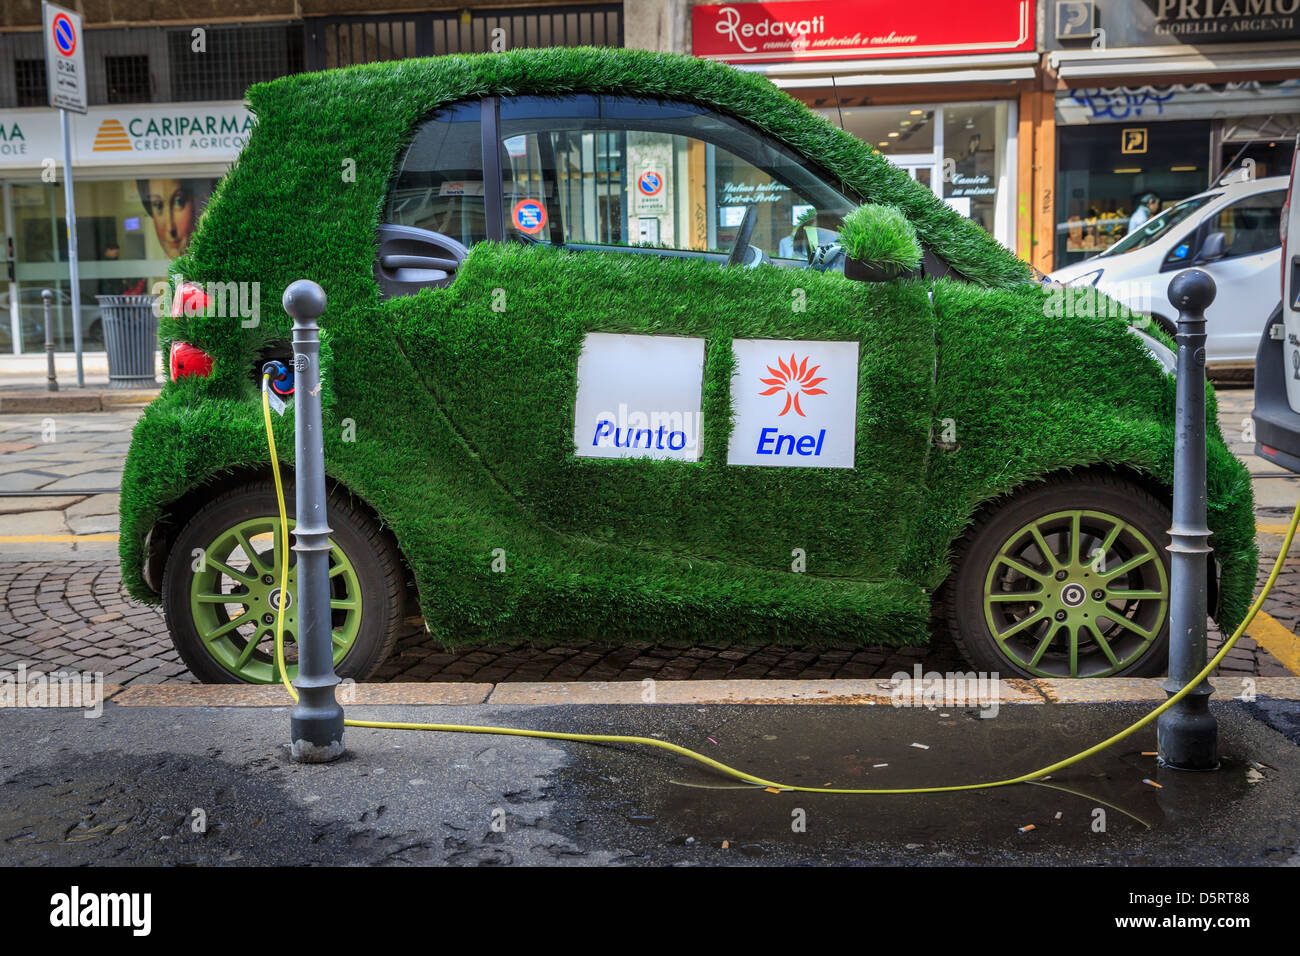 An electric Smart car with grass cover and Punto Enel markings, Milan, Italy Stock Photo